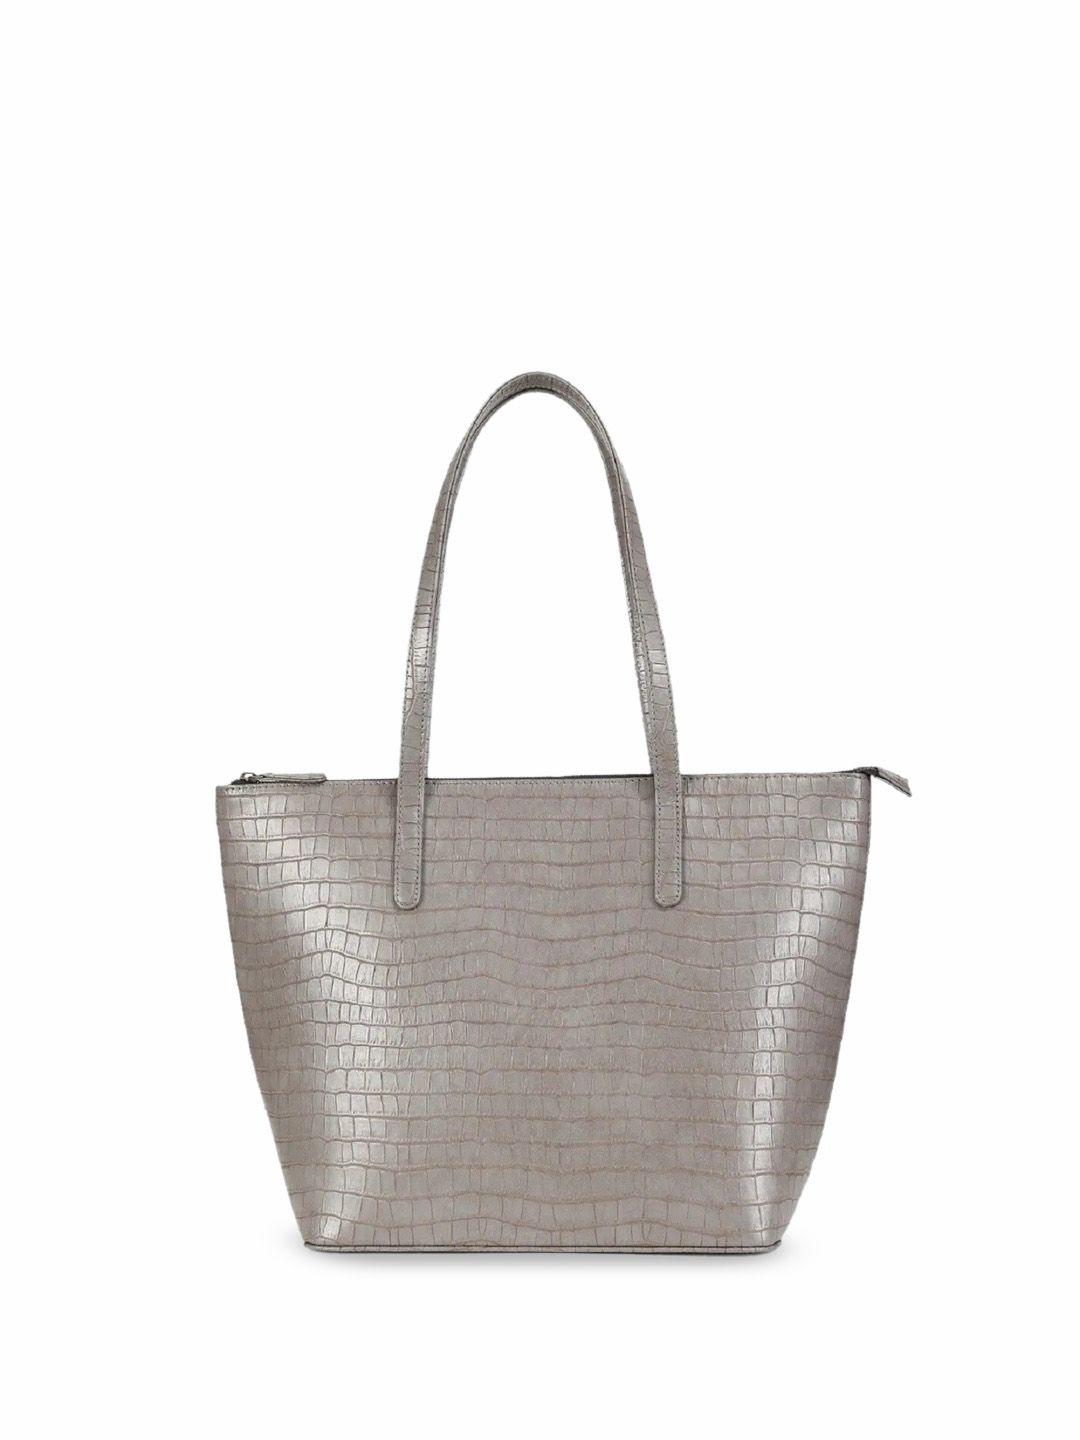 mast & harbour textured pu oversized structured handheld bag up to 12 inch